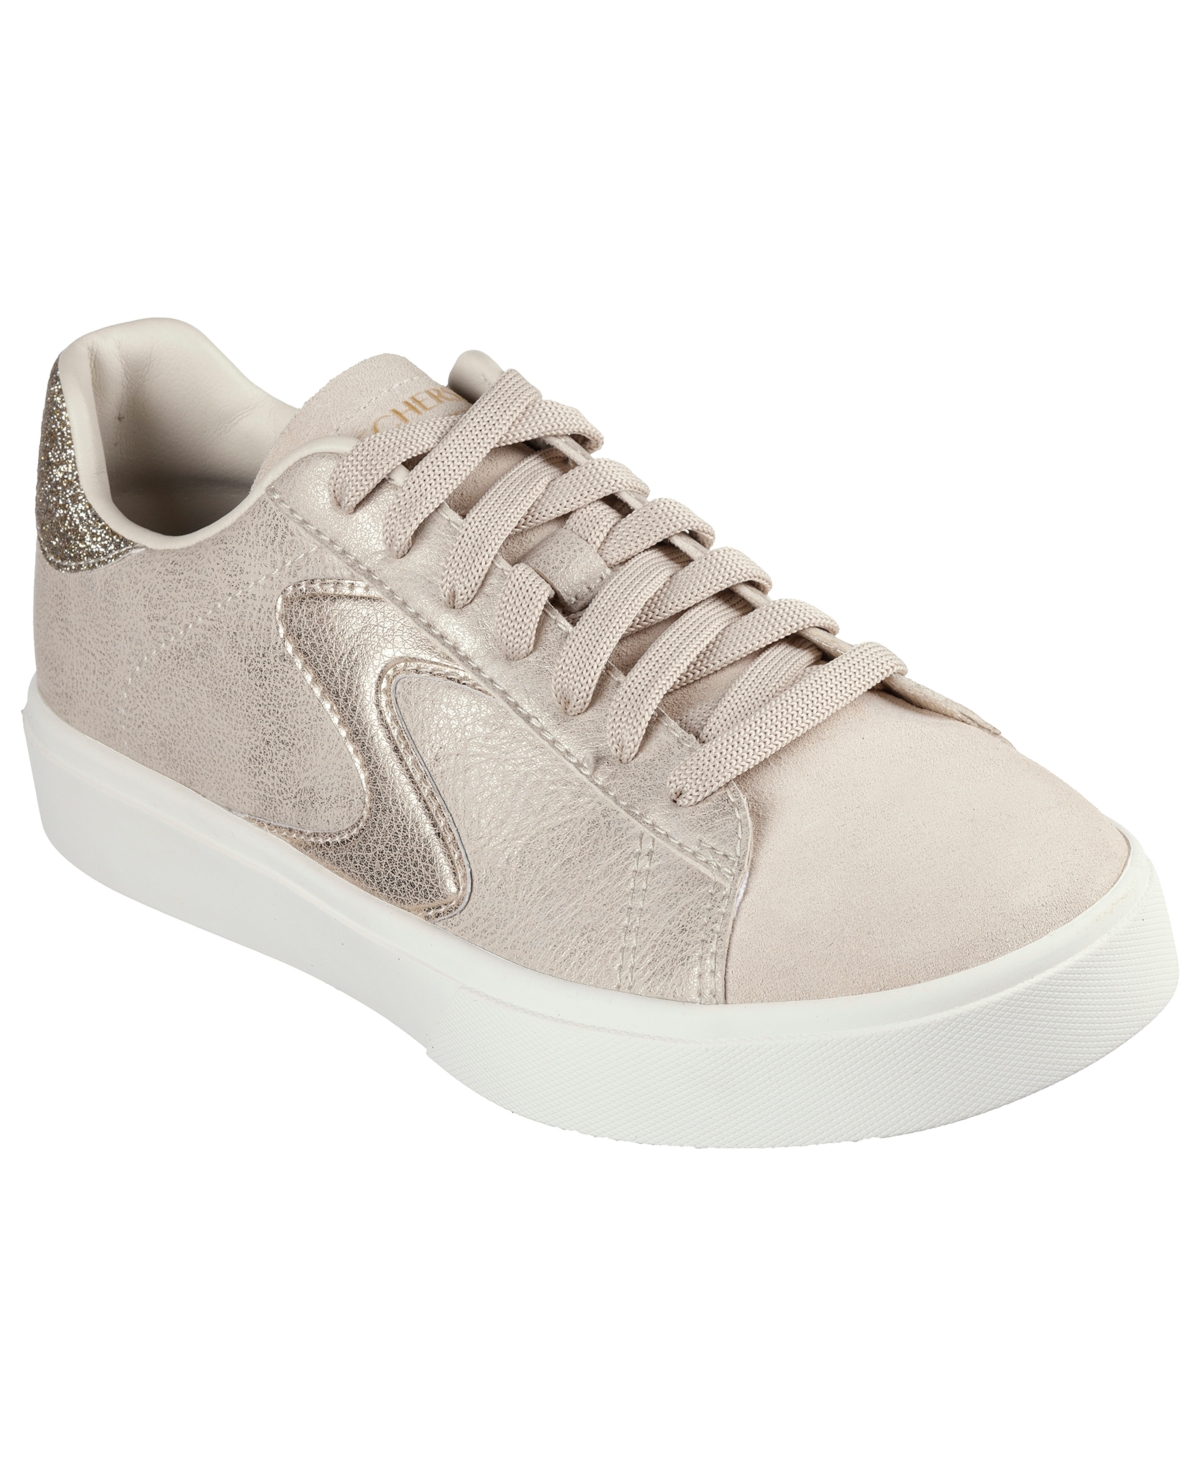 Women's Eden Lx Glimpse of Glitter Casual Sneakers from Finish Line - NATURAL/GOLD